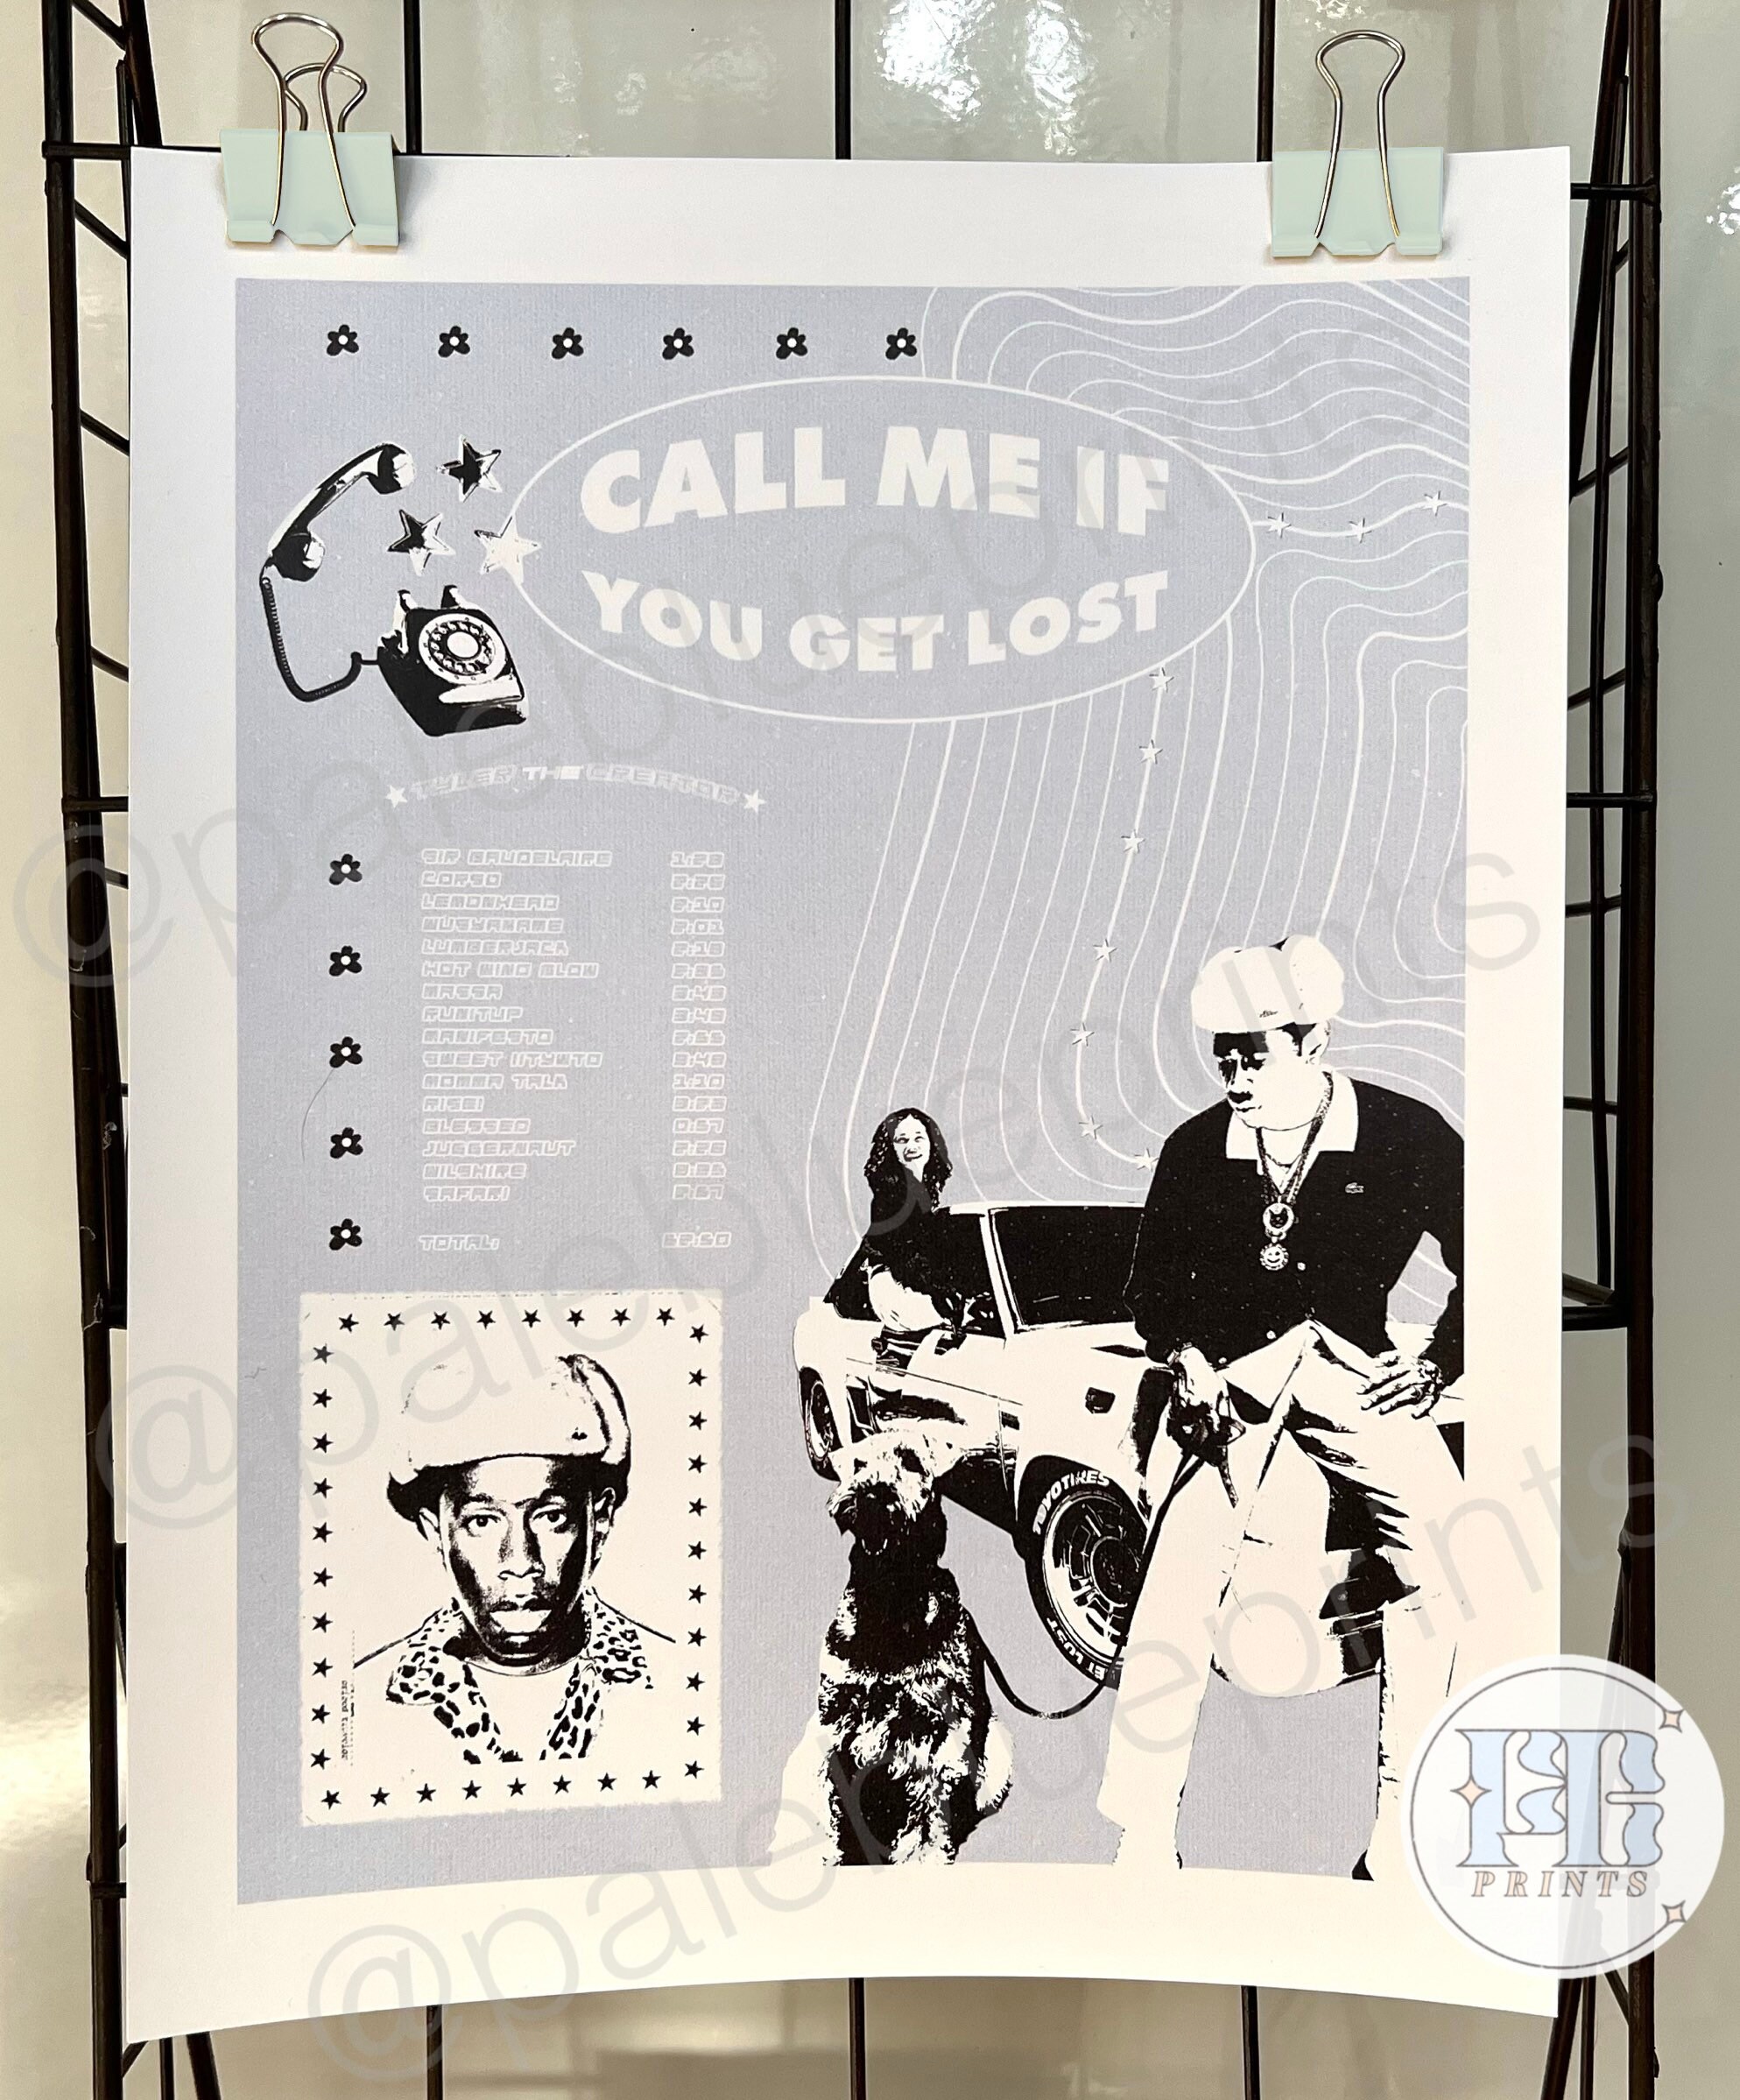 Call me if you get lost, retro style poster print